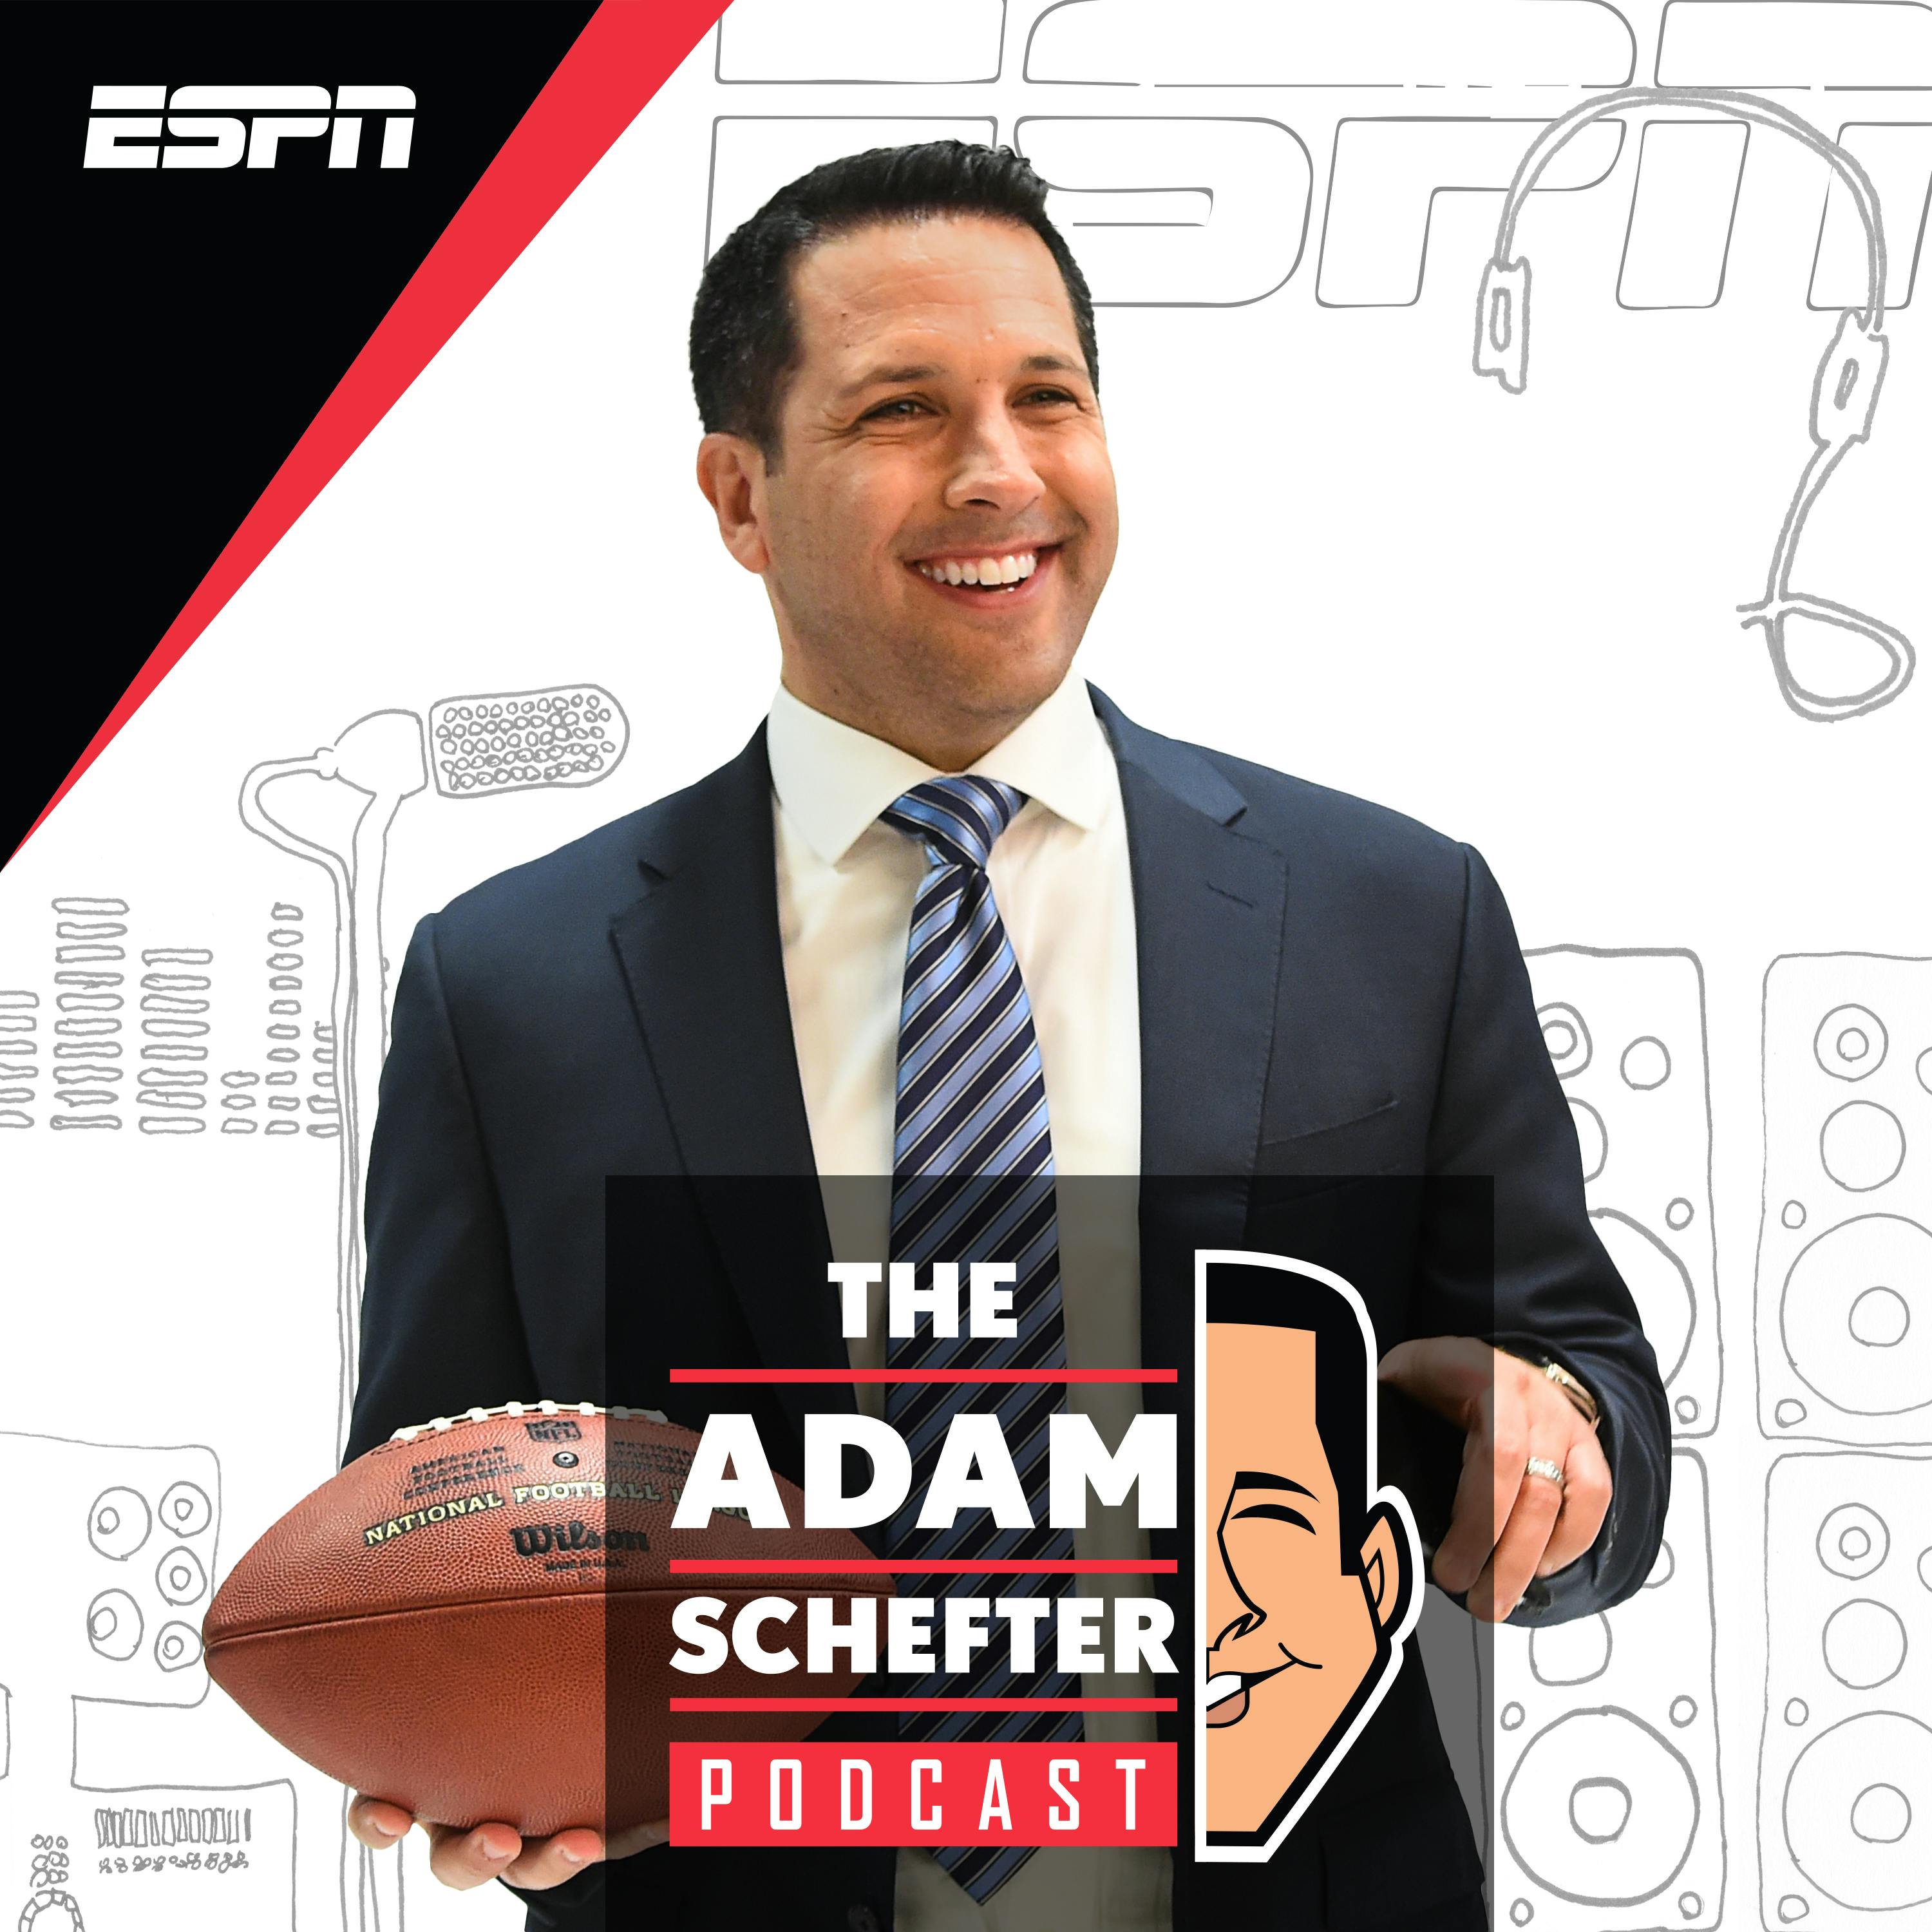 Adam Schefter on Twitter: ESPN's Sunday NFL Countdown starts an hour  earlier than usual today, at 9 am ET, due to the College Football Selection  Show that kicks off at noon.  /